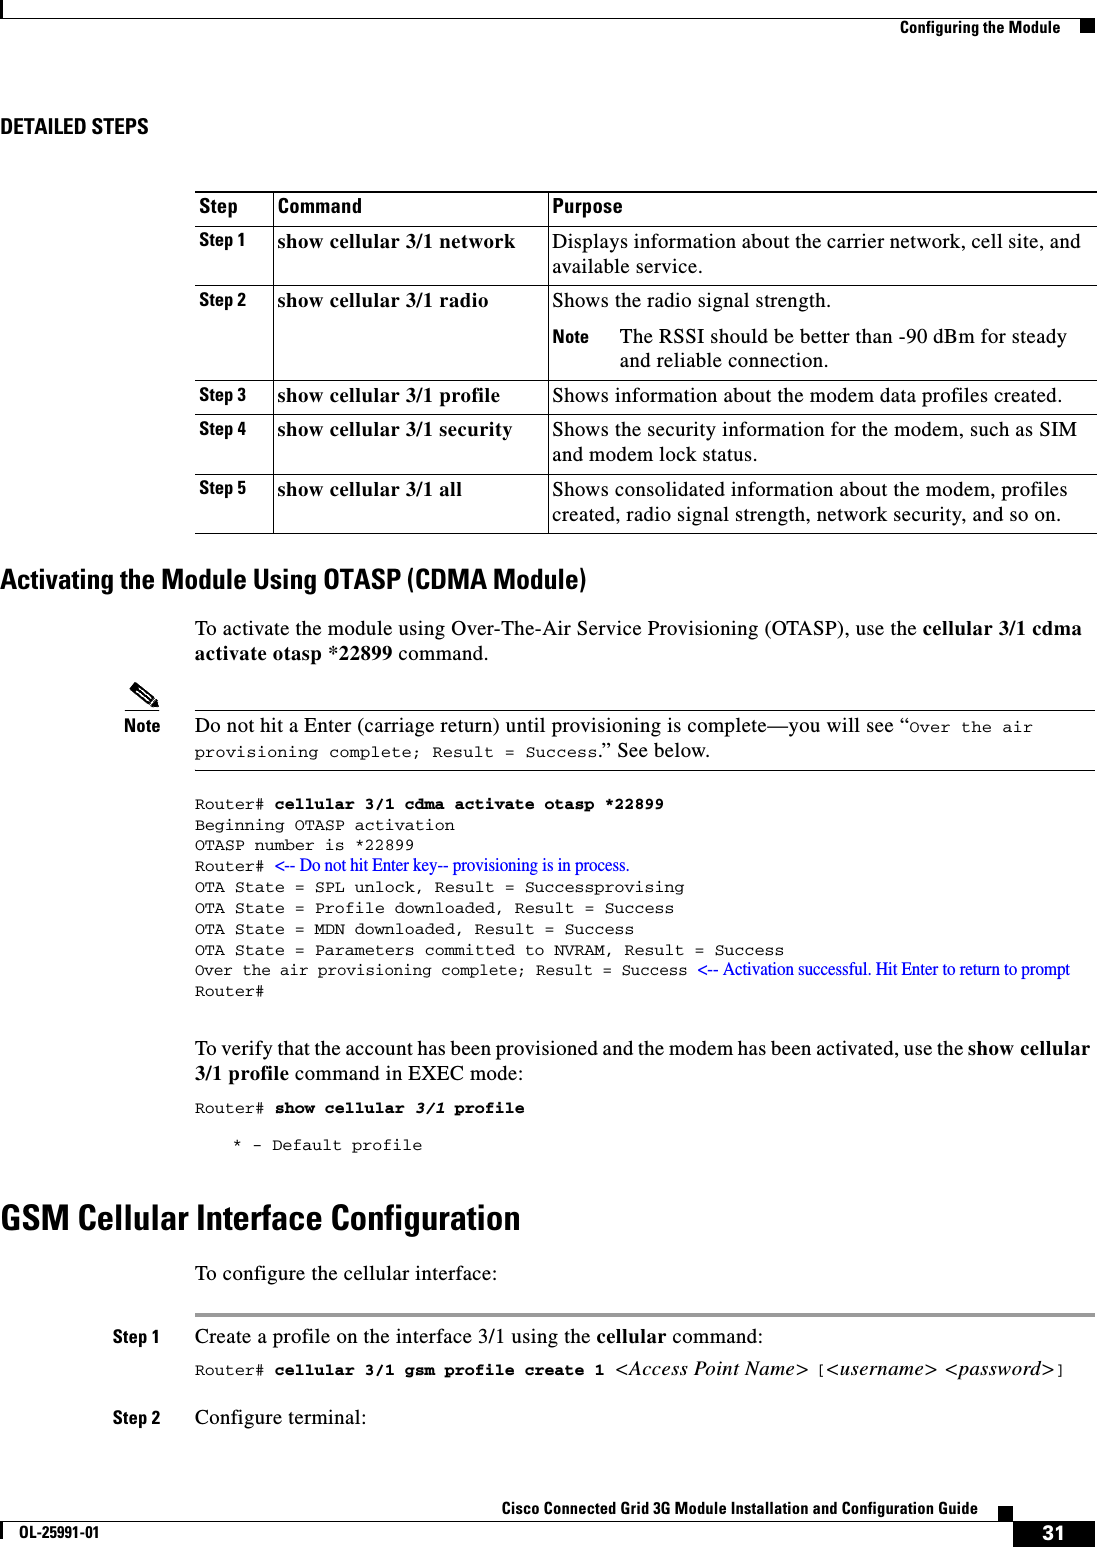 31Cisco Connected Grid 3G Module Installation and Configuration GuideOL-25991-01  Configuring the ModuleDETAILED STEPSActivating the Module Using OTASP (CDMA Module)To activate the module using Over-The-Air Service Provisioning (OTASP), use the cellular 3/1 cdma activate otasp *22899 command.Note Do not hit a Enter (carriage return) until provisioning is complete—you will see “Over the air provisioning complete; Result = Success.” See below.Router# cellular 3/1 cdma activate otasp *22899Beginning OTASP activationOTASP number is *22899Router# &lt;-- Do not hit Enter key-- provisioning is in process. OTA State = SPL unlock, Result = SuccessprovisingOTA State = Profile downloaded, Result = SuccessOTA State = MDN downloaded, Result = SuccessOTA State = Parameters committed to NVRAM, Result = SuccessOver the air provisioning complete; Result = Success &lt;-- Activation successful. Hit Enter to return to promptRouter#To verify that the account has been provisioned and the modem has been activated, use the show cellular 3/1 profile command in EXEC mode:Router# show cellular 3/1 profile* - Default profileGSM Cellular Interface ConfigurationTo configure the cellular interface:Step 1 Create a profile on the interface 3/1 using the cellular command:Router# cellular 3/1 gsm profile create 1 &lt;Access Point Name&gt; [&lt;username&gt; &lt;password&gt;]Step 2 Configure terminal:Step Command PurposeStep 1 show cellular 3/1 network Displays information about the carrier network, cell site, and available service.Step 2 show cellular 3/1 radio Shows the radio signal strength.Note The RSSI should be better than -90 dBm for steady and reliable connection.Step 3 show cellular 3/1 profile Shows information about the modem data profiles created.Step 4 show cellular 3/1 security Shows the security information for the modem, such as SIM and modem lock status.Step 5 show cellular 3/1 all Shows consolidated information about the modem, profiles created, radio signal strength, network security, and so on.